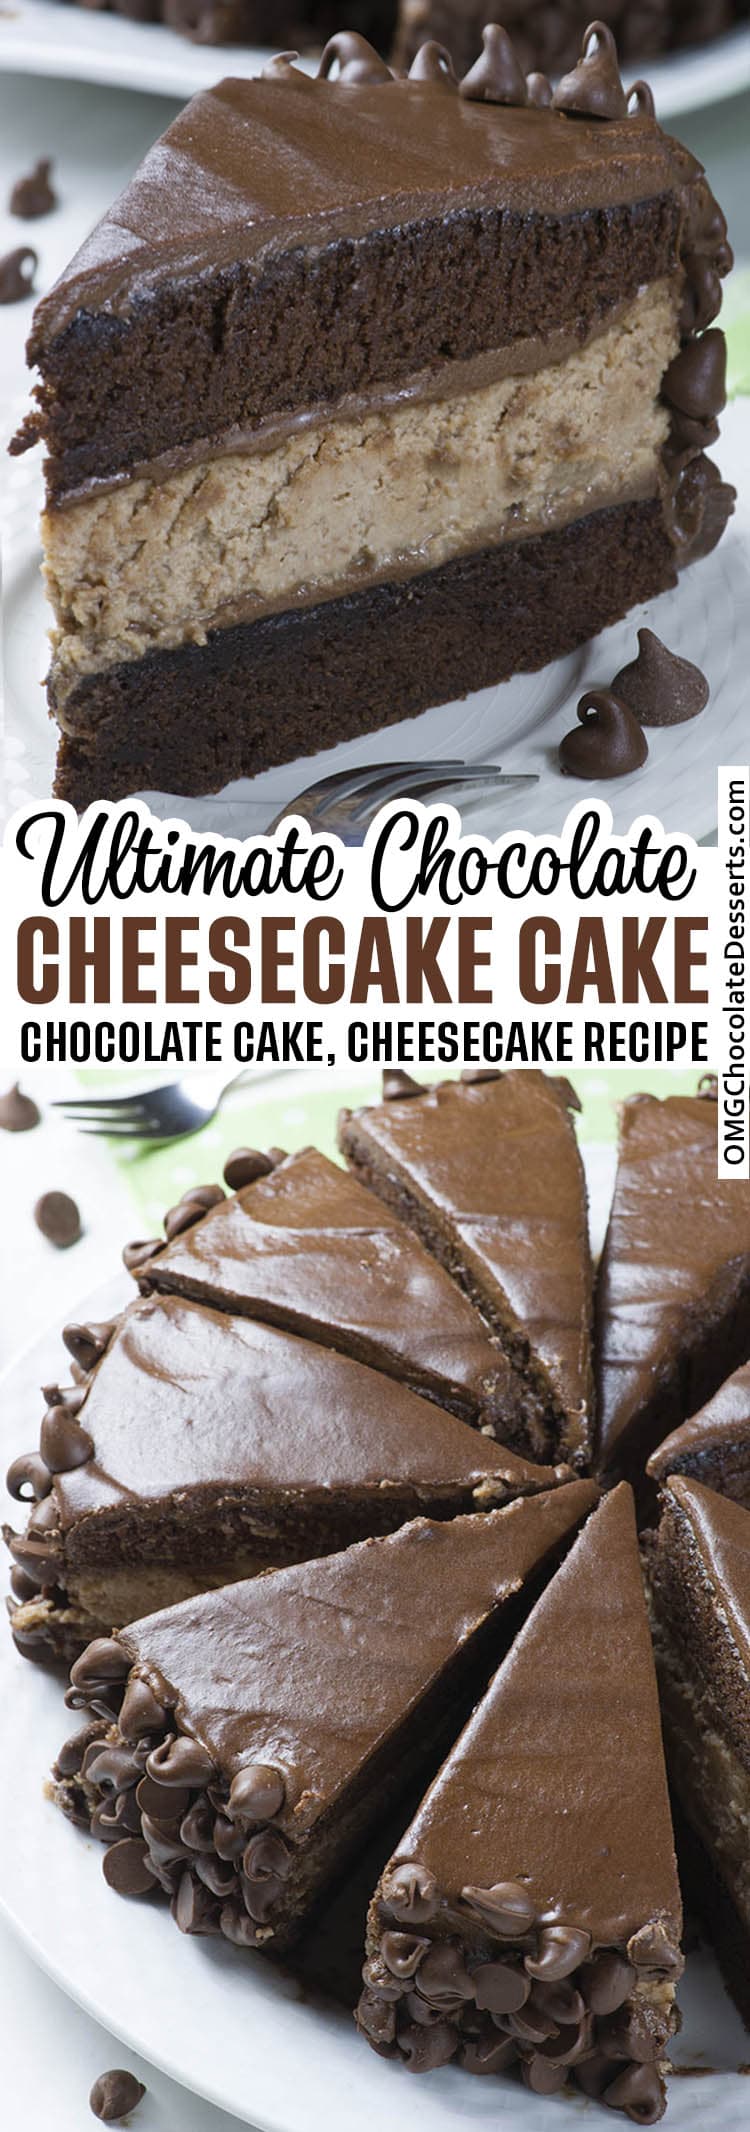 Rich and decadent combo of my favorite chocolate cheesecake and Hershey’s “Perfectly Chocolate” Chocolate Cake recipe and frosting, surrounded with lots of chocolate chips! This cake is definitely a chocolate lover’s dream!